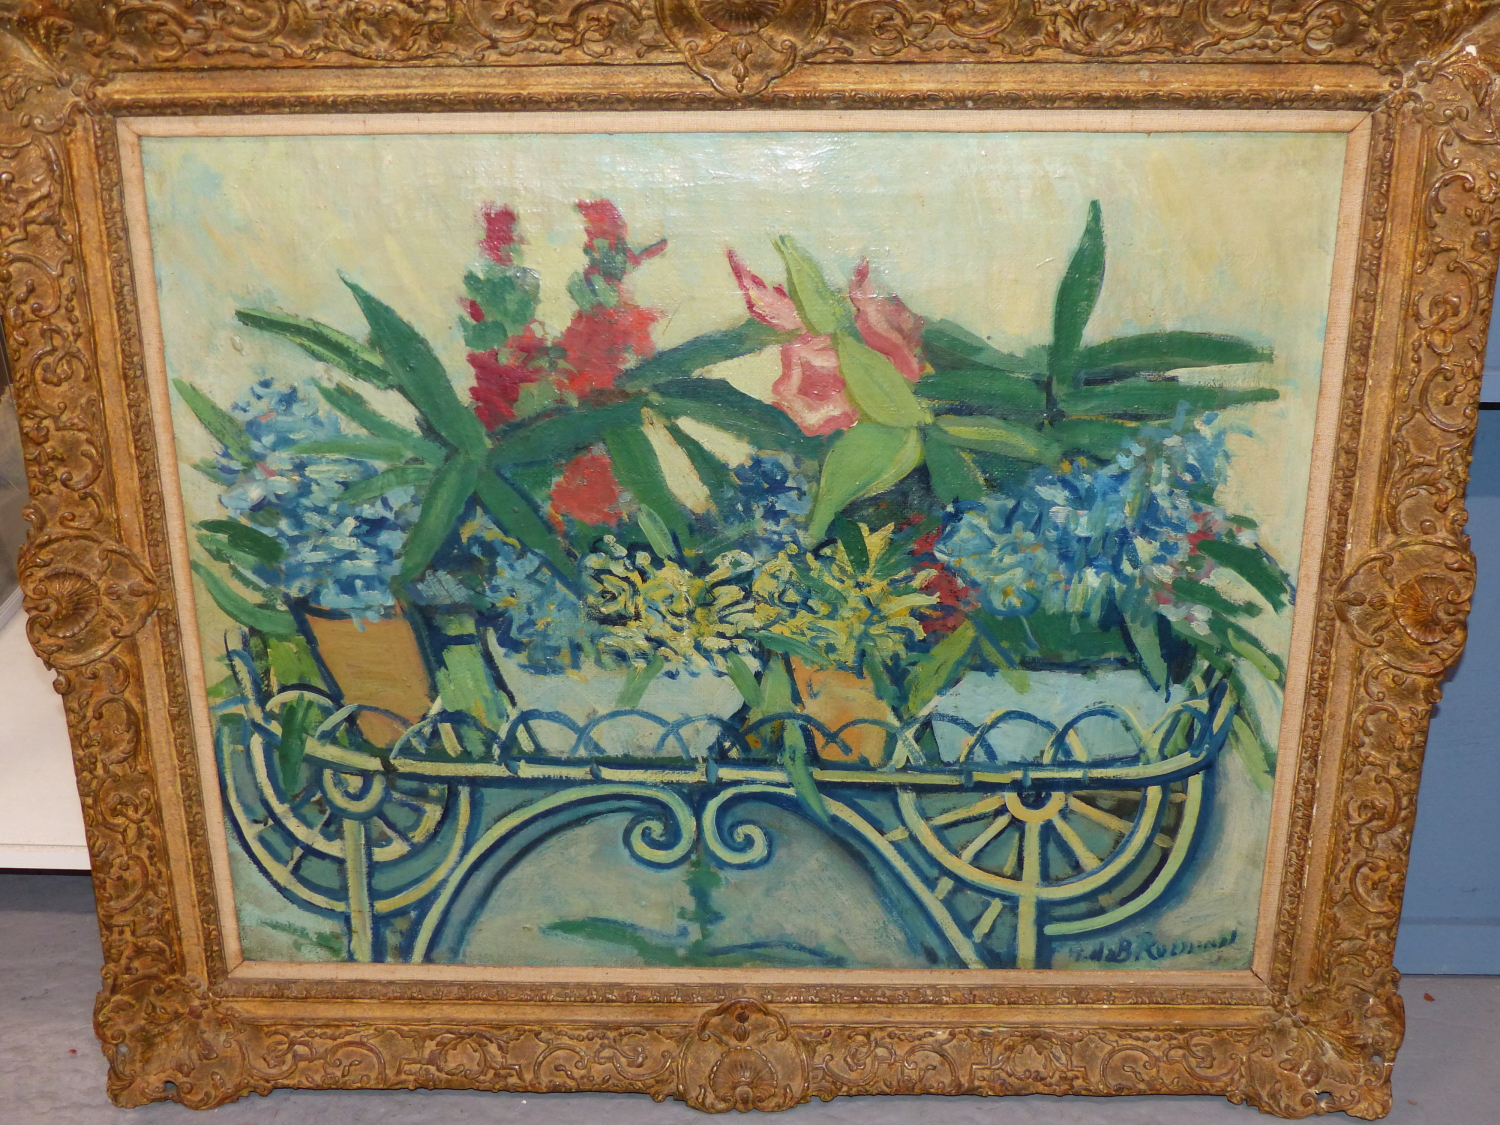 CONTINENTAL SCHOOL (EARLY 20TH CENTURY), STILL LIFE OF FLOWERS IN A WIRE PLANTER, INDISTINCTLY - Image 2 of 4